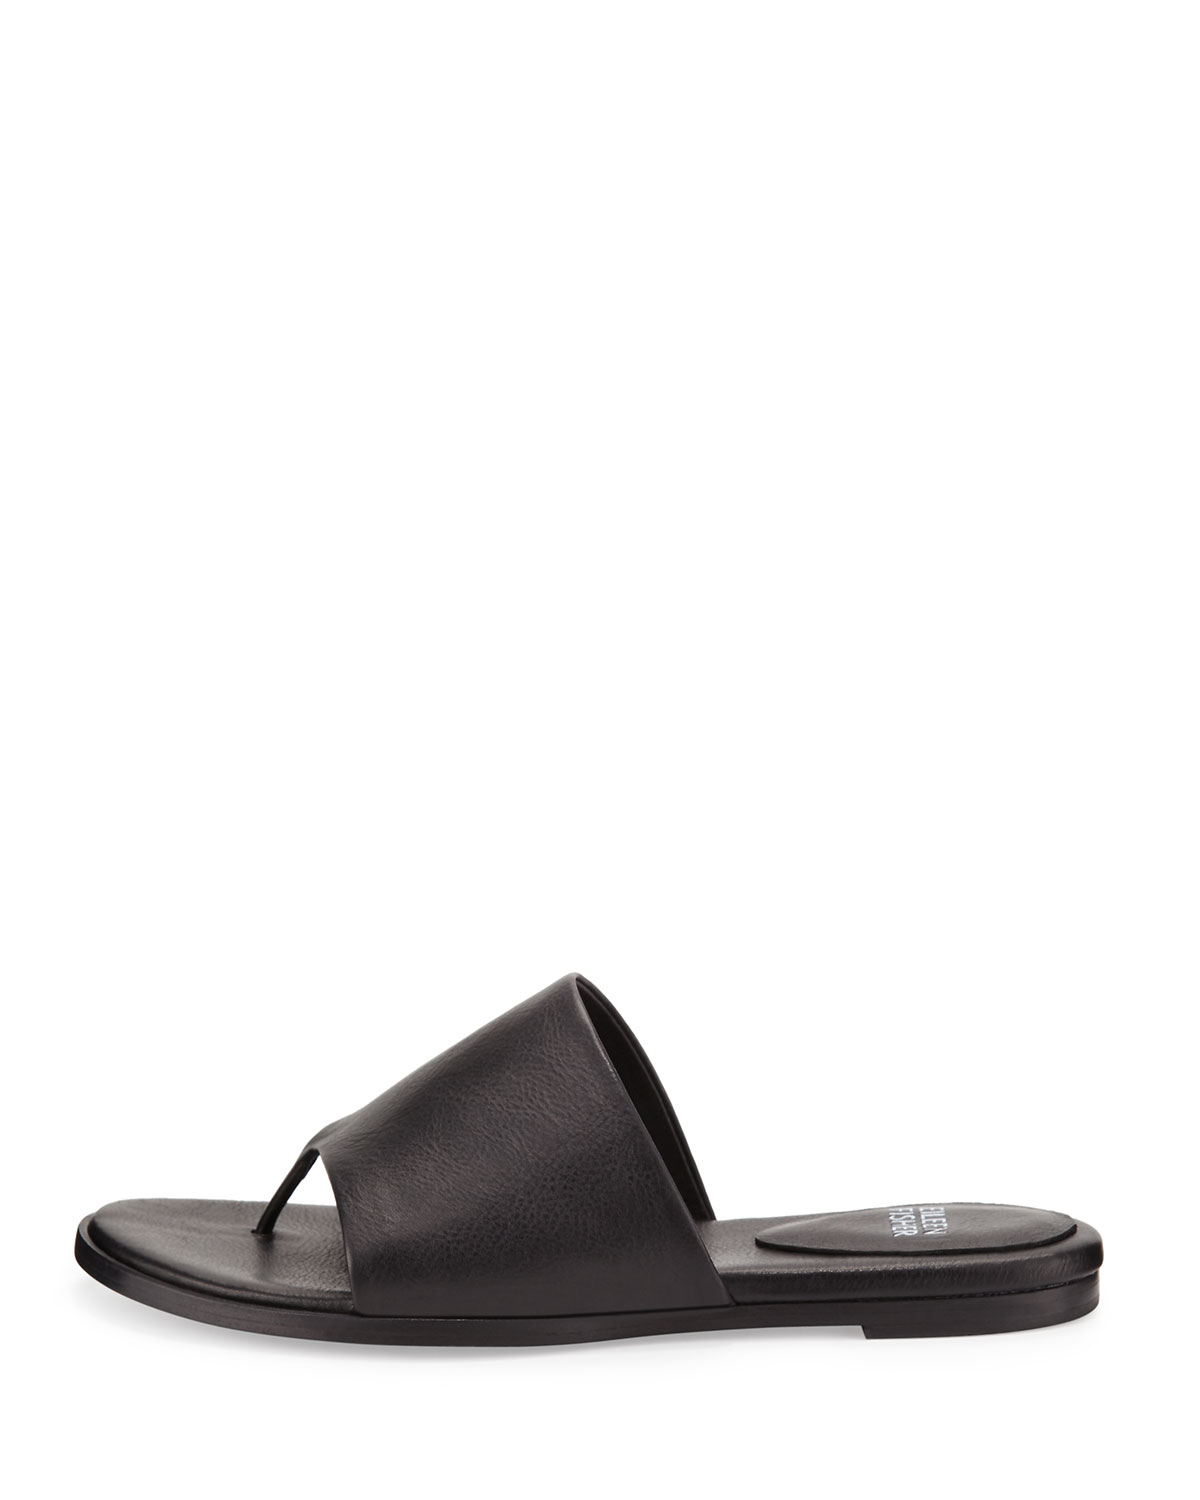 Lyst - Eileen Fisher Edge Leather Thong Sandal in Black